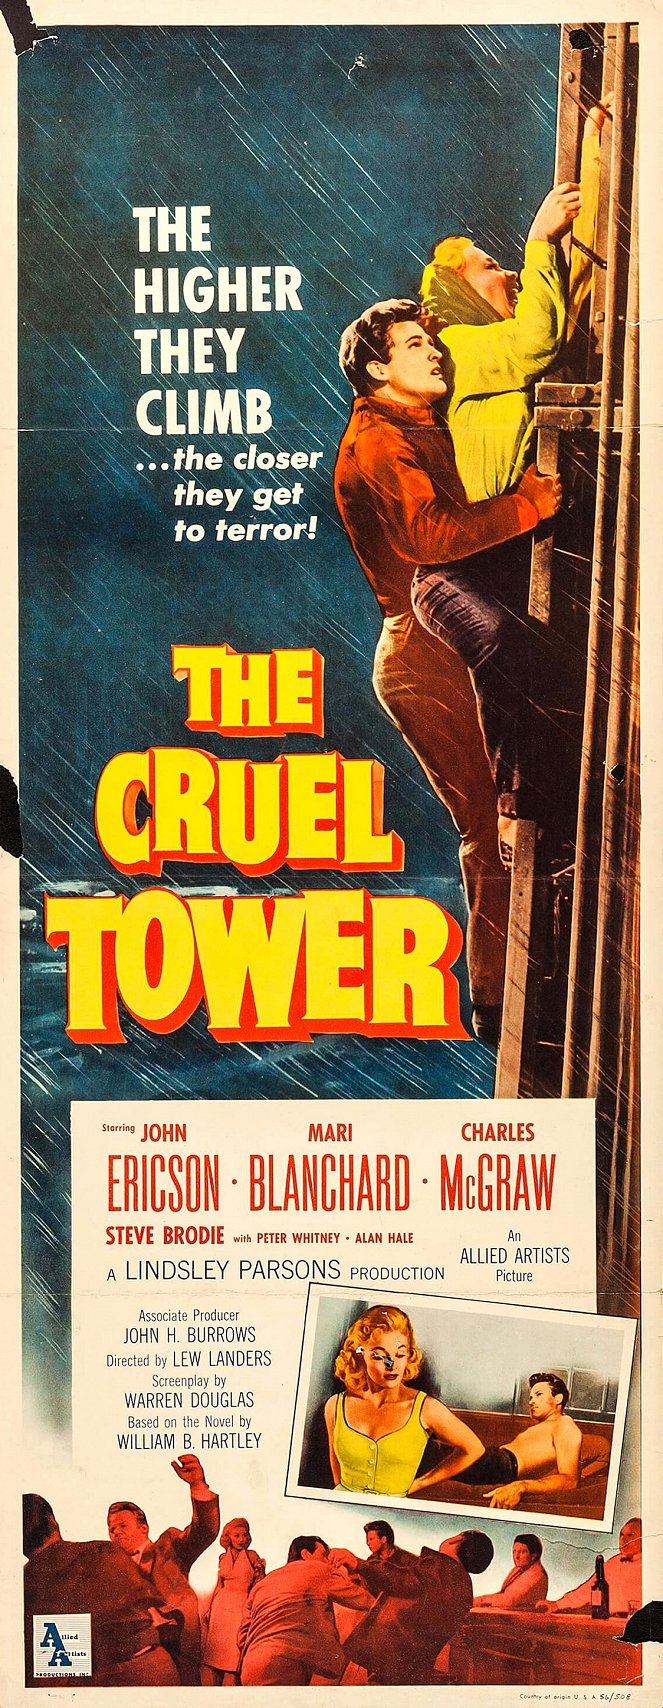 The Cruel Tower - Posters